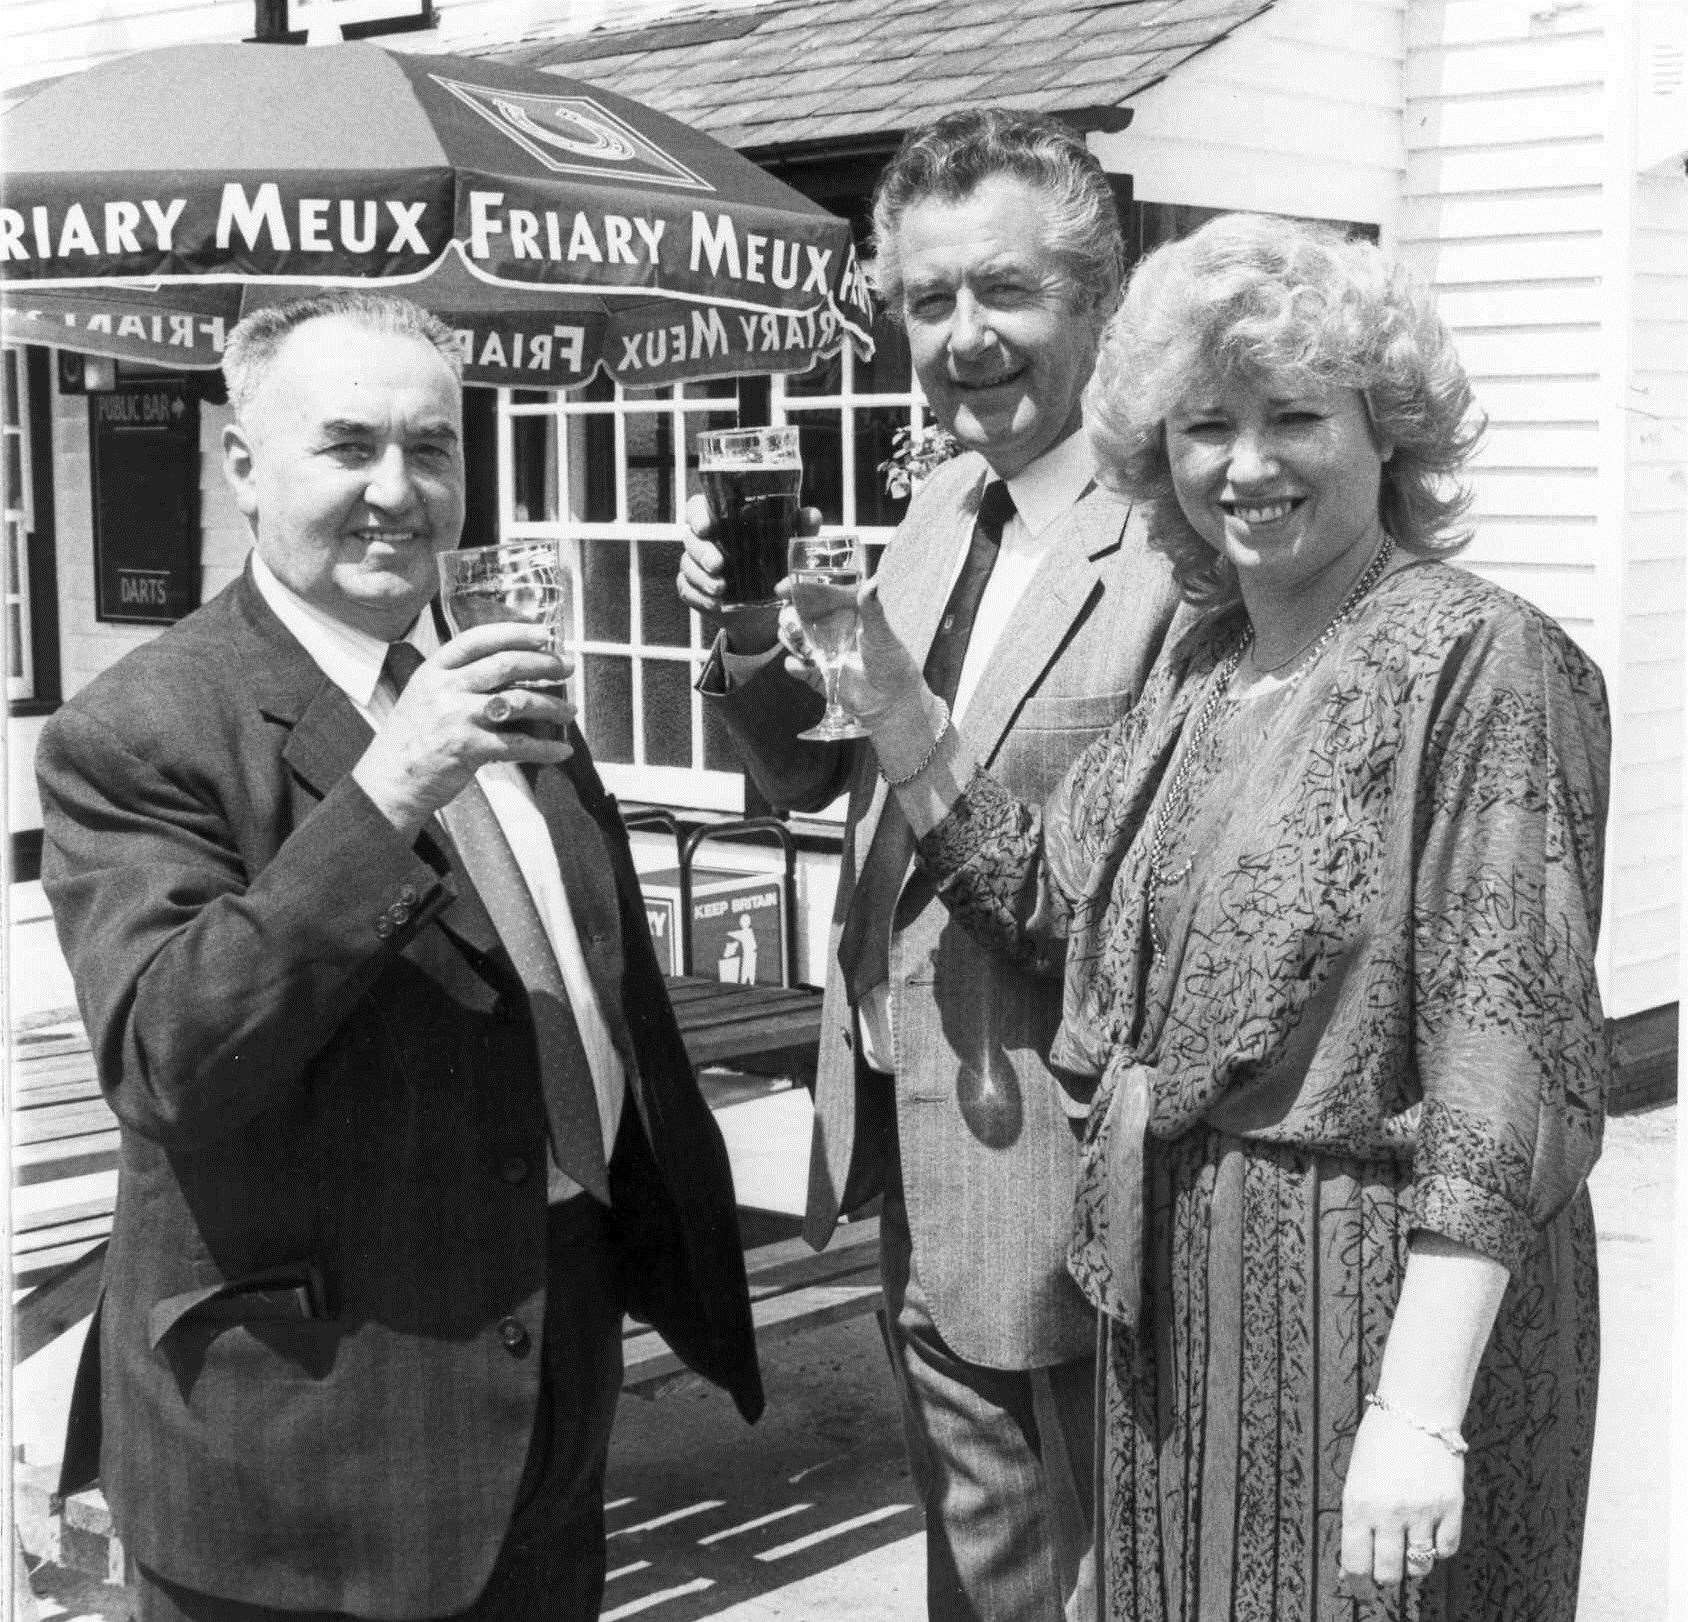 Raising a glass at The Three Crutches pub in Strood in July 1988, which is still serving pints to this day